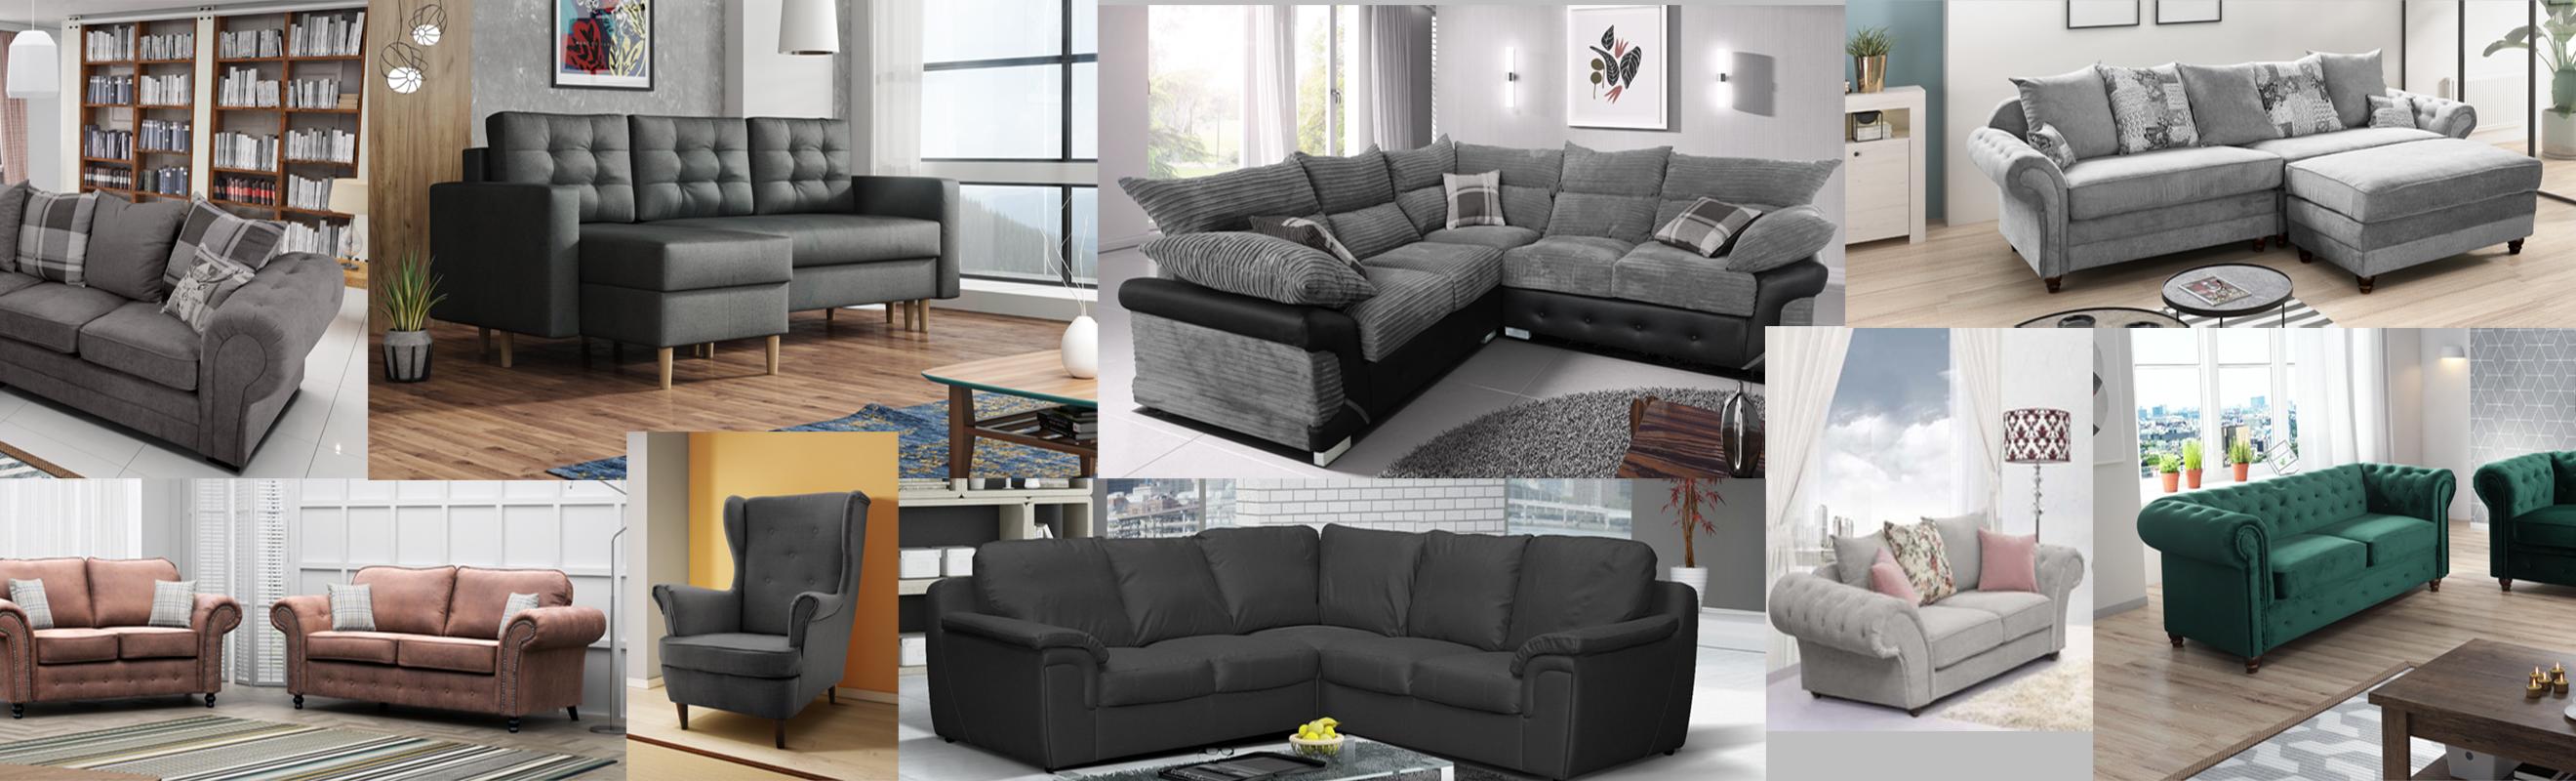 MODERN & STYLISH FURNITURE AT AFFORDABLE PRICES & FREE DELIVERY